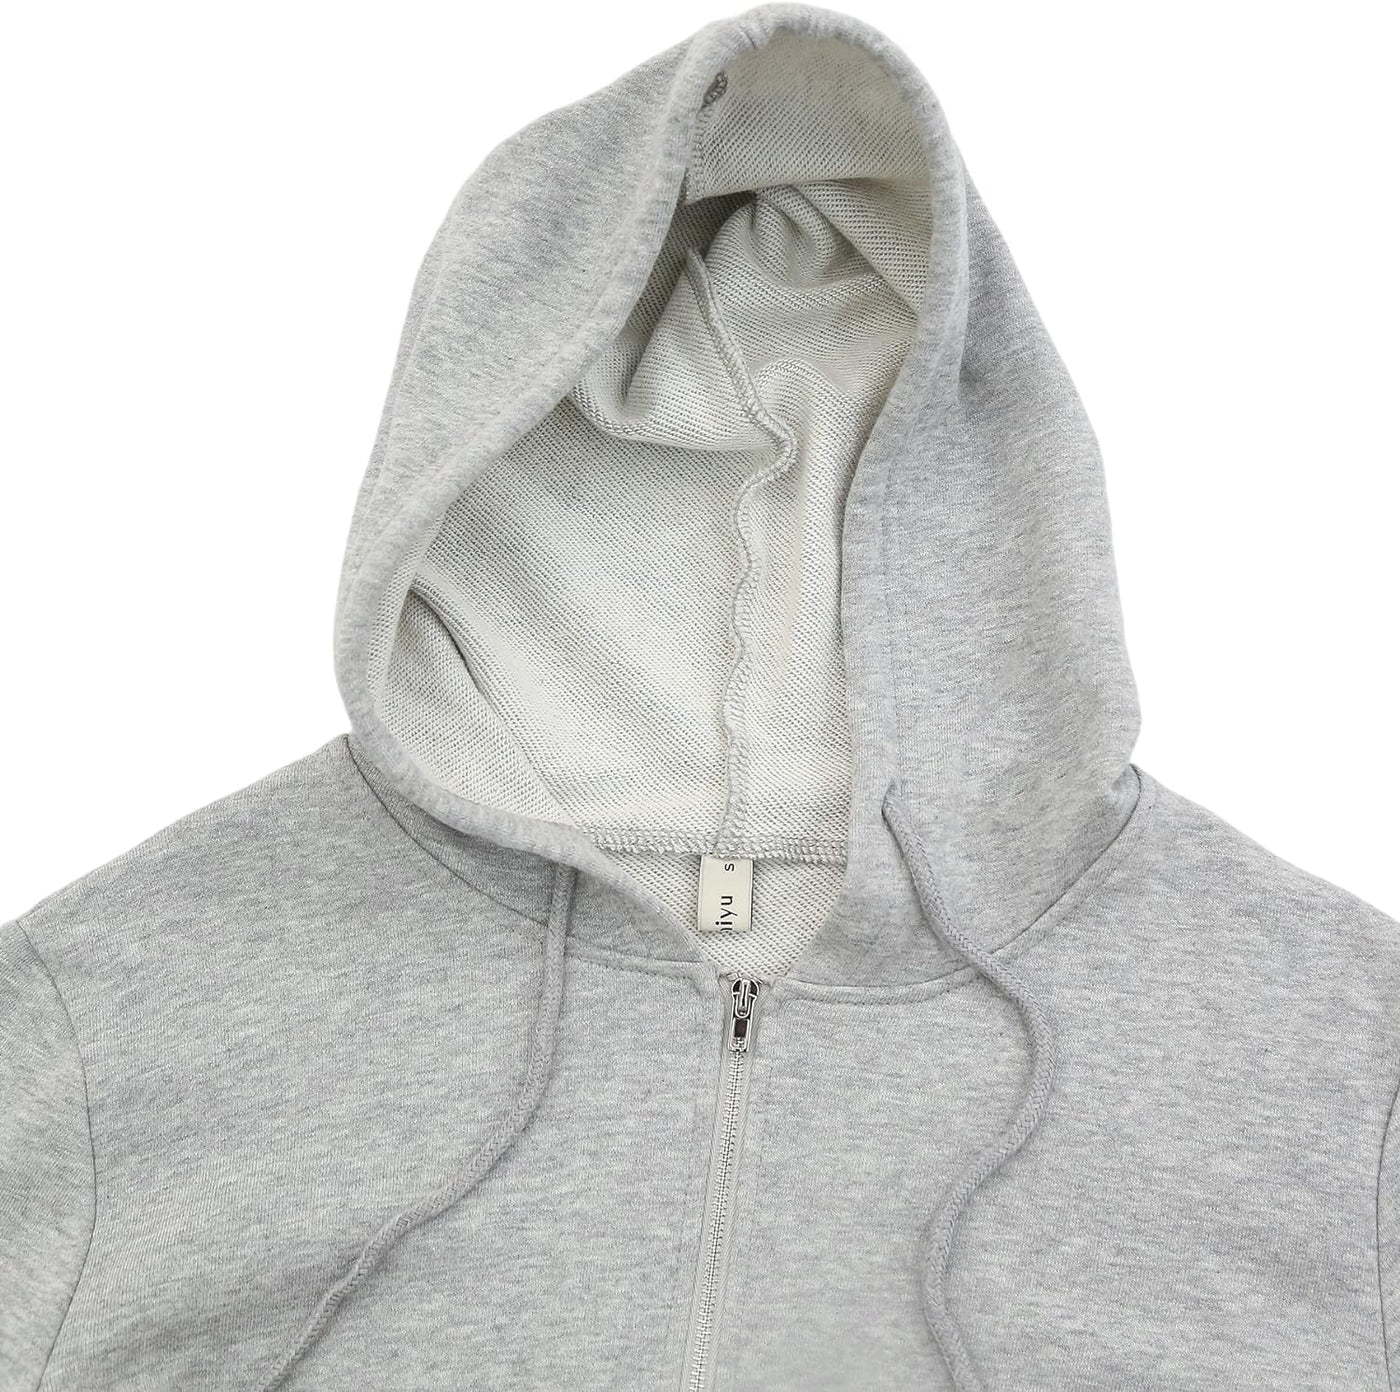 NTG Fad Women's Cropped Zip up Hoodie with Drawstring Hooded